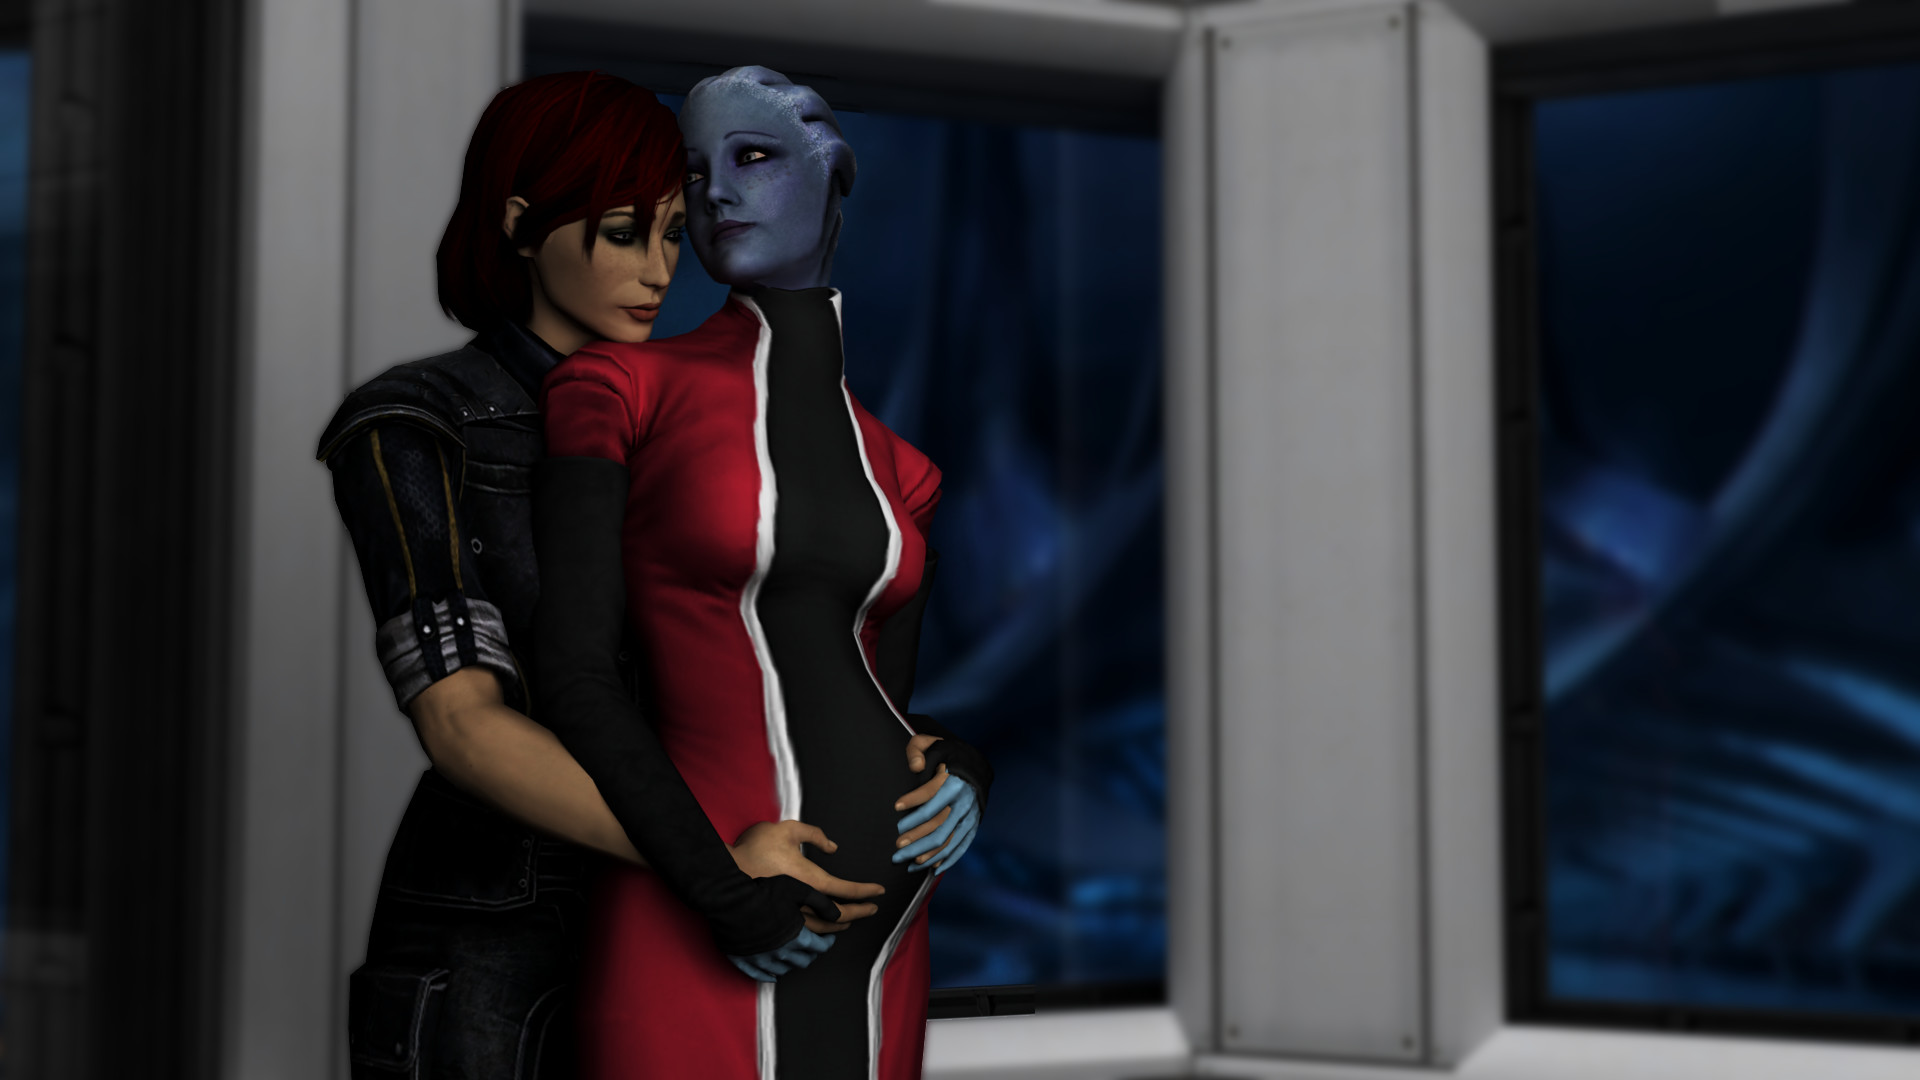 … A Shepard and Liara legacy by neehs